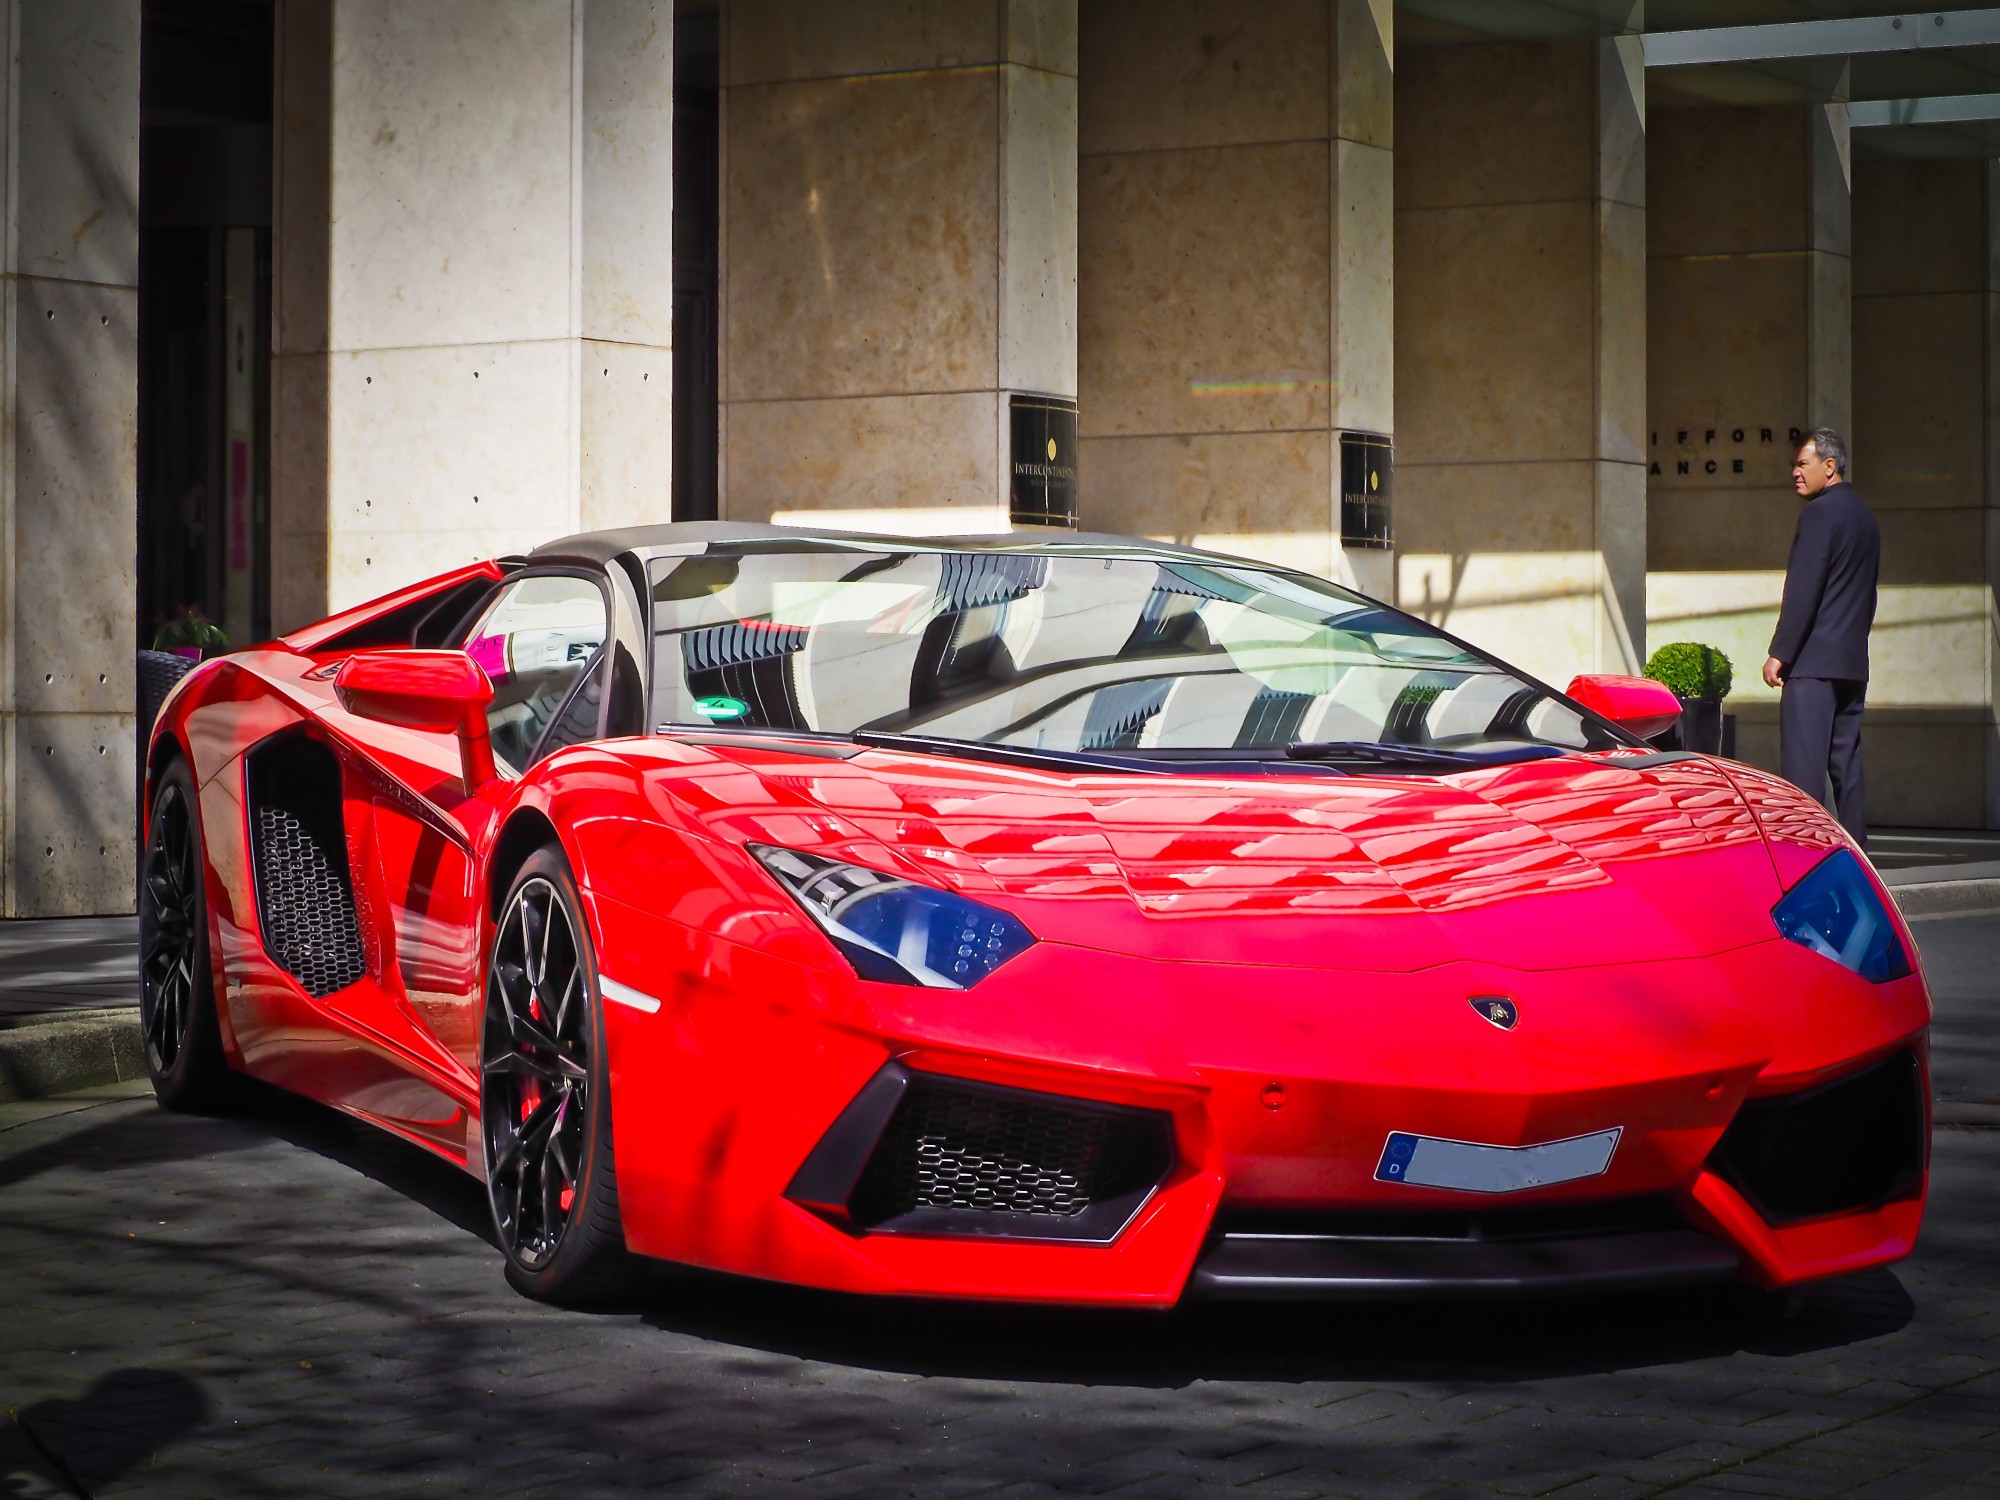 Driving a Lamborghini can be a great way to celebrate a birthday or anniversary, but how much does it cost to rent a Lamborghini?